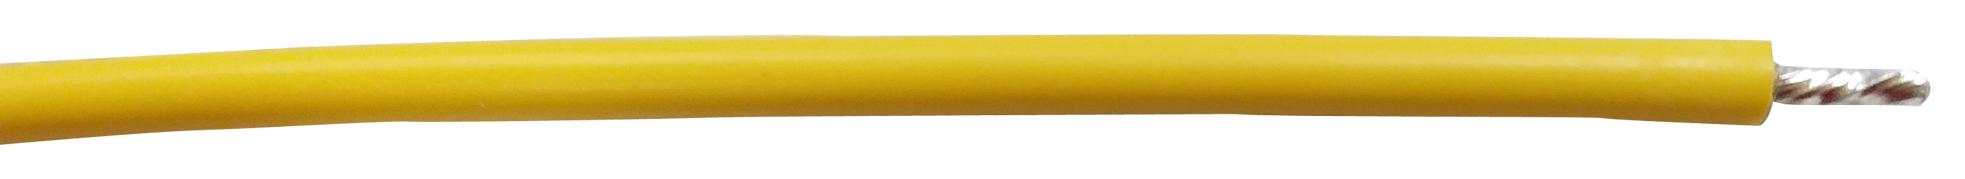 PP002501 CABLE WIRE, 22AWG, YELLOW, 305M PRO POWER